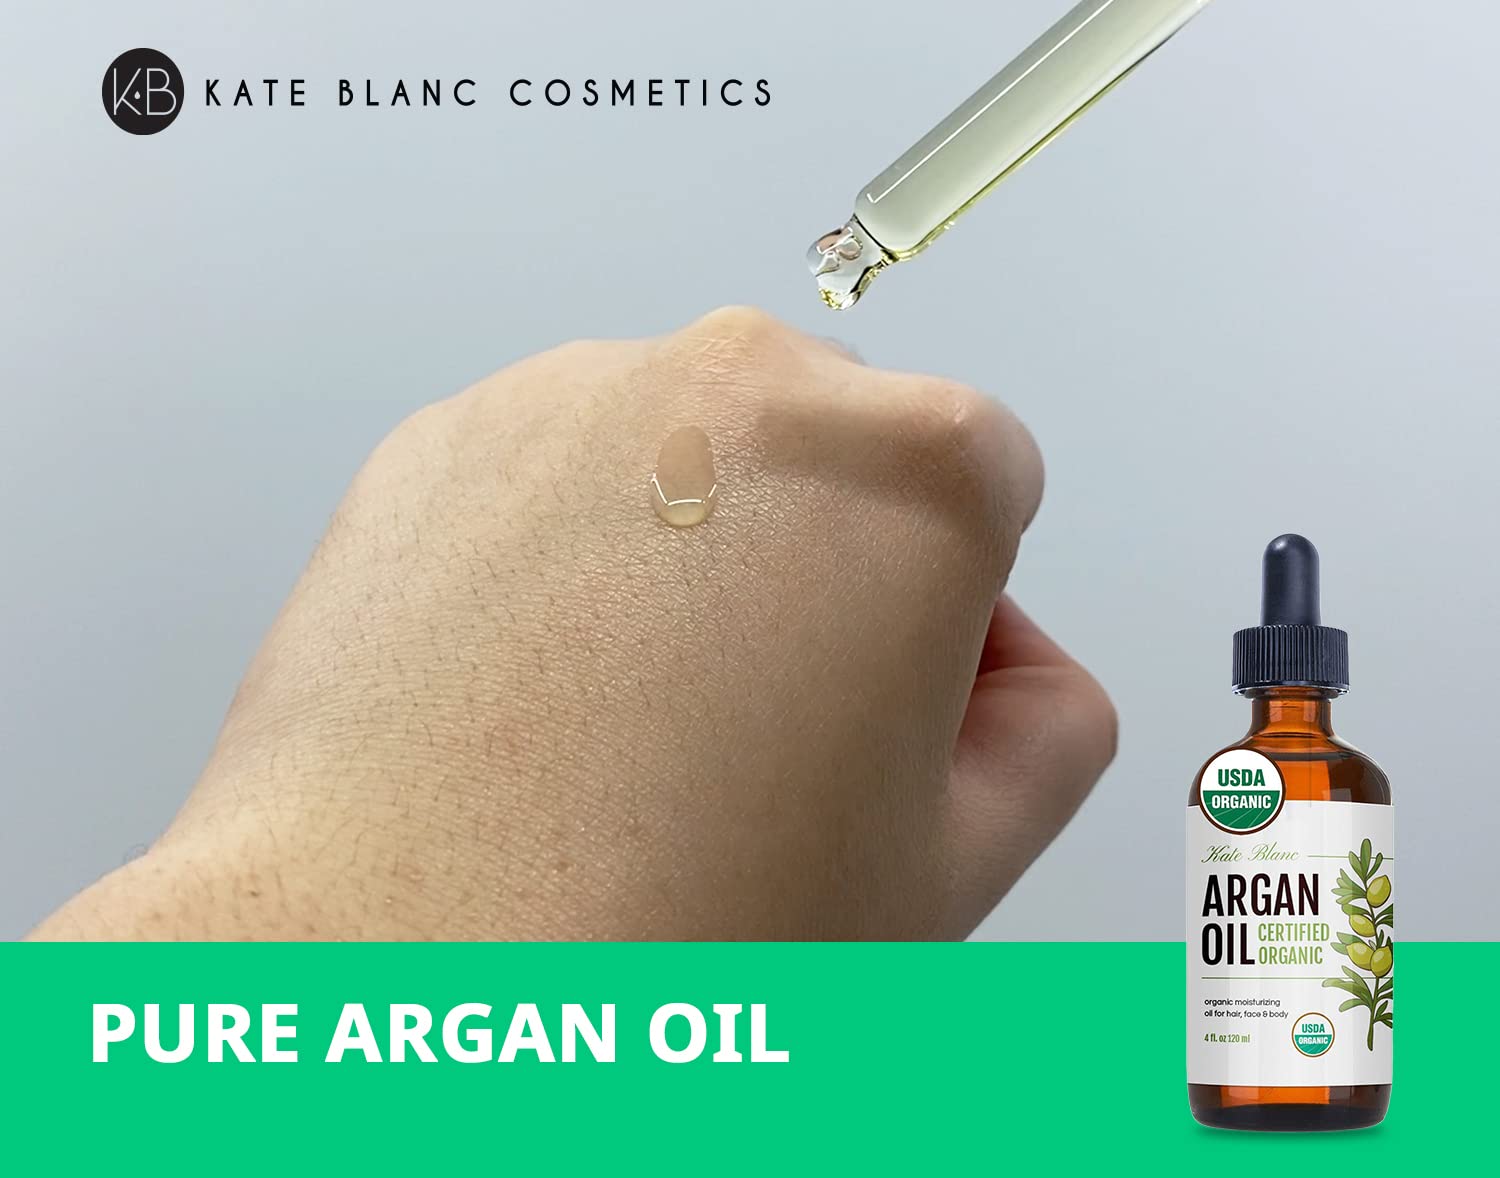 Kate Blanc Cosmetics Argan Oil for Hair and Skin 100% Pure Cold Pressed Organic Argan Hair Oil for Curly Frizzy Hair. Stimulate Growth for Dry Damaged Hair. Moroccan Skin Moisturizer (Light 4oz)